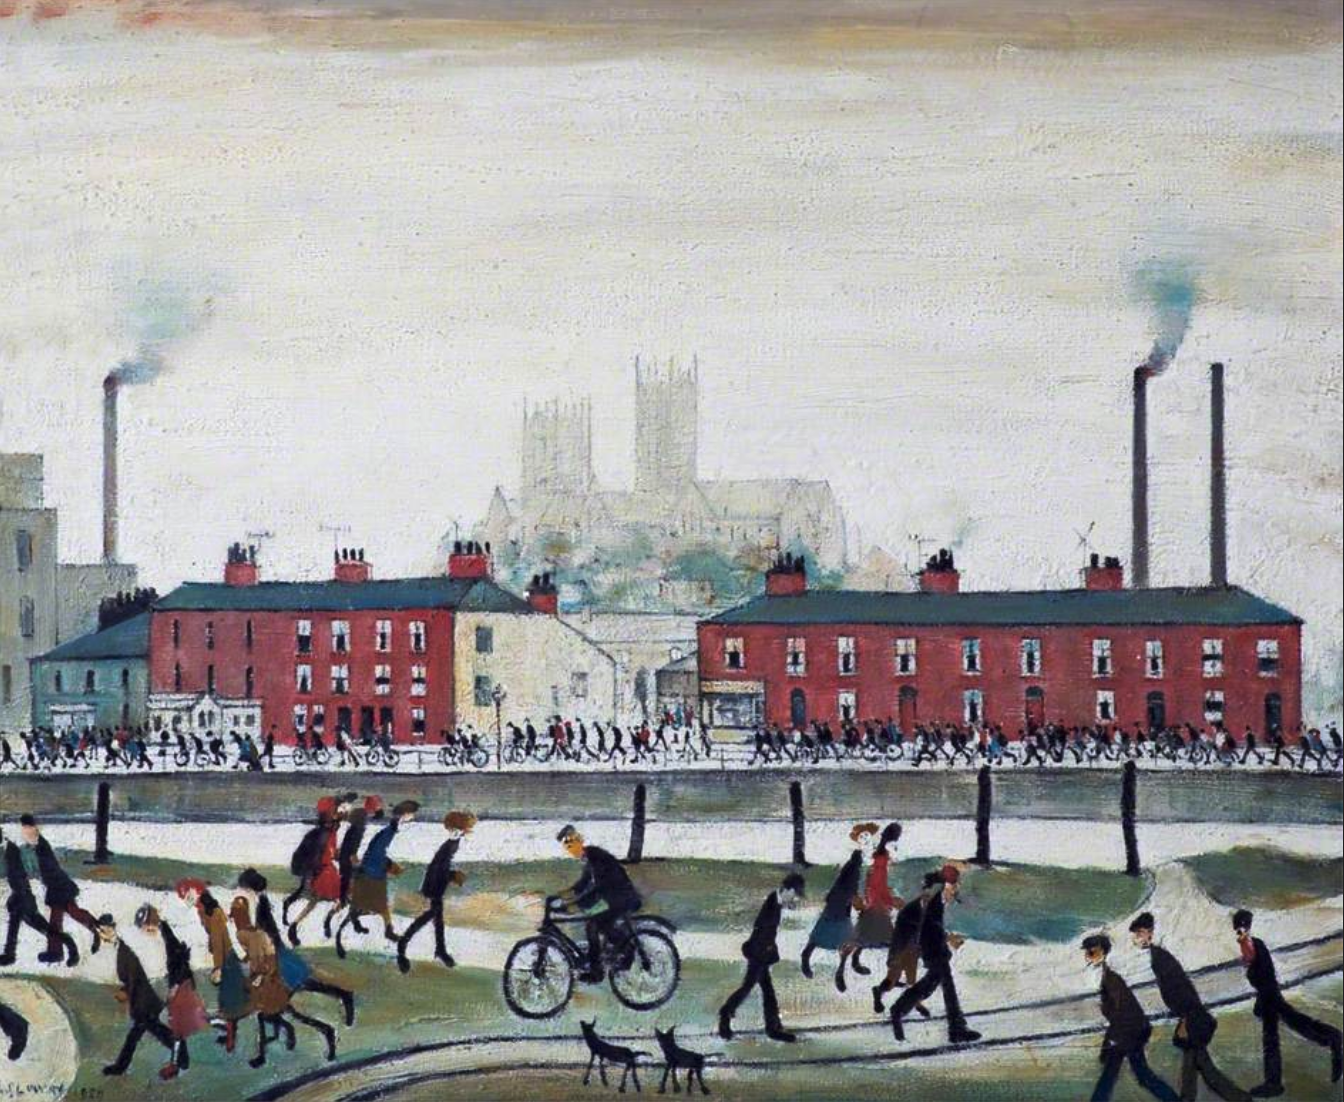 Lincoln (1907) by Laurence Stephen Lowry (1887 - 1976), English artist.